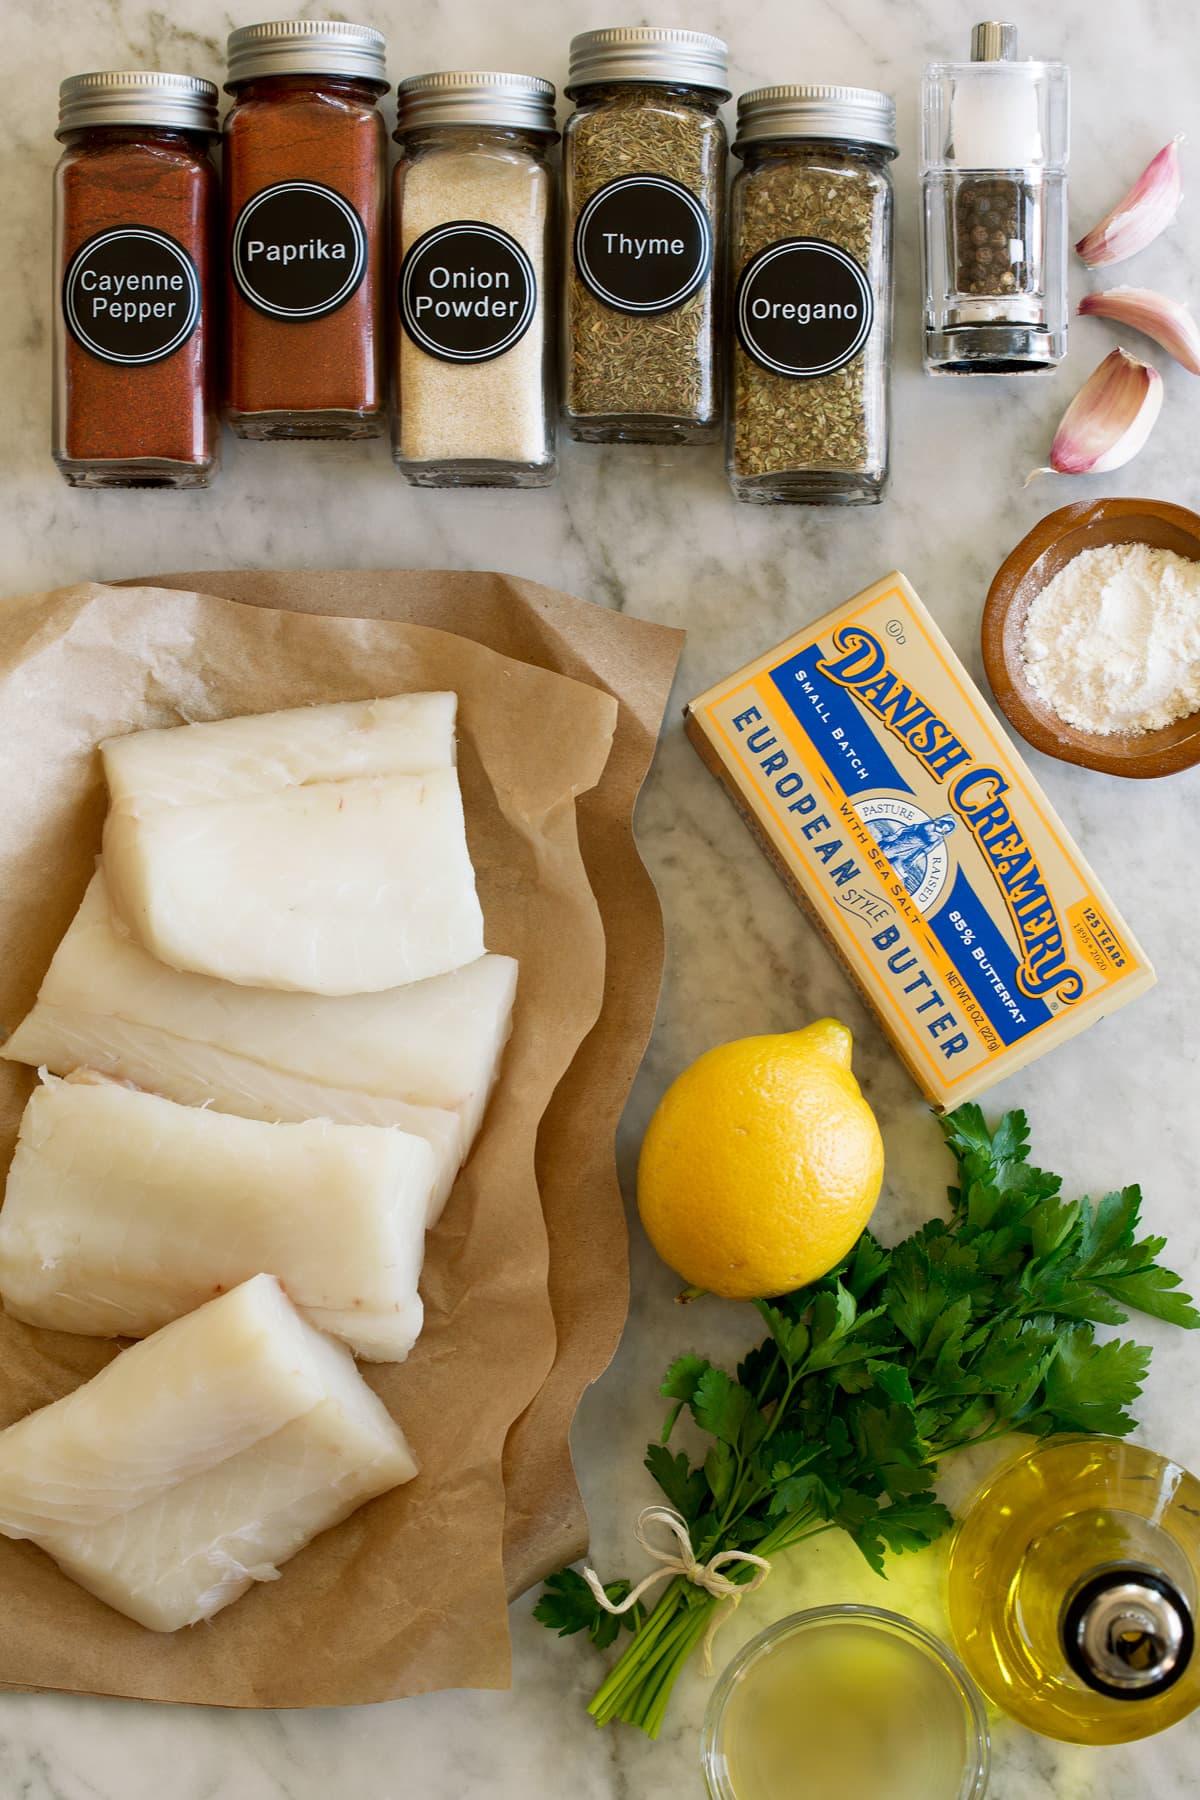 Photo of ingredients that are used to make this lemon butter cod recipe. Includes fresh cod fillets, oregano, thyme, onion powder, paprika, cayenne pepper, salt and pepper, flour, garlic, butter, lemon, parsley, olive oil, and chicken broth.